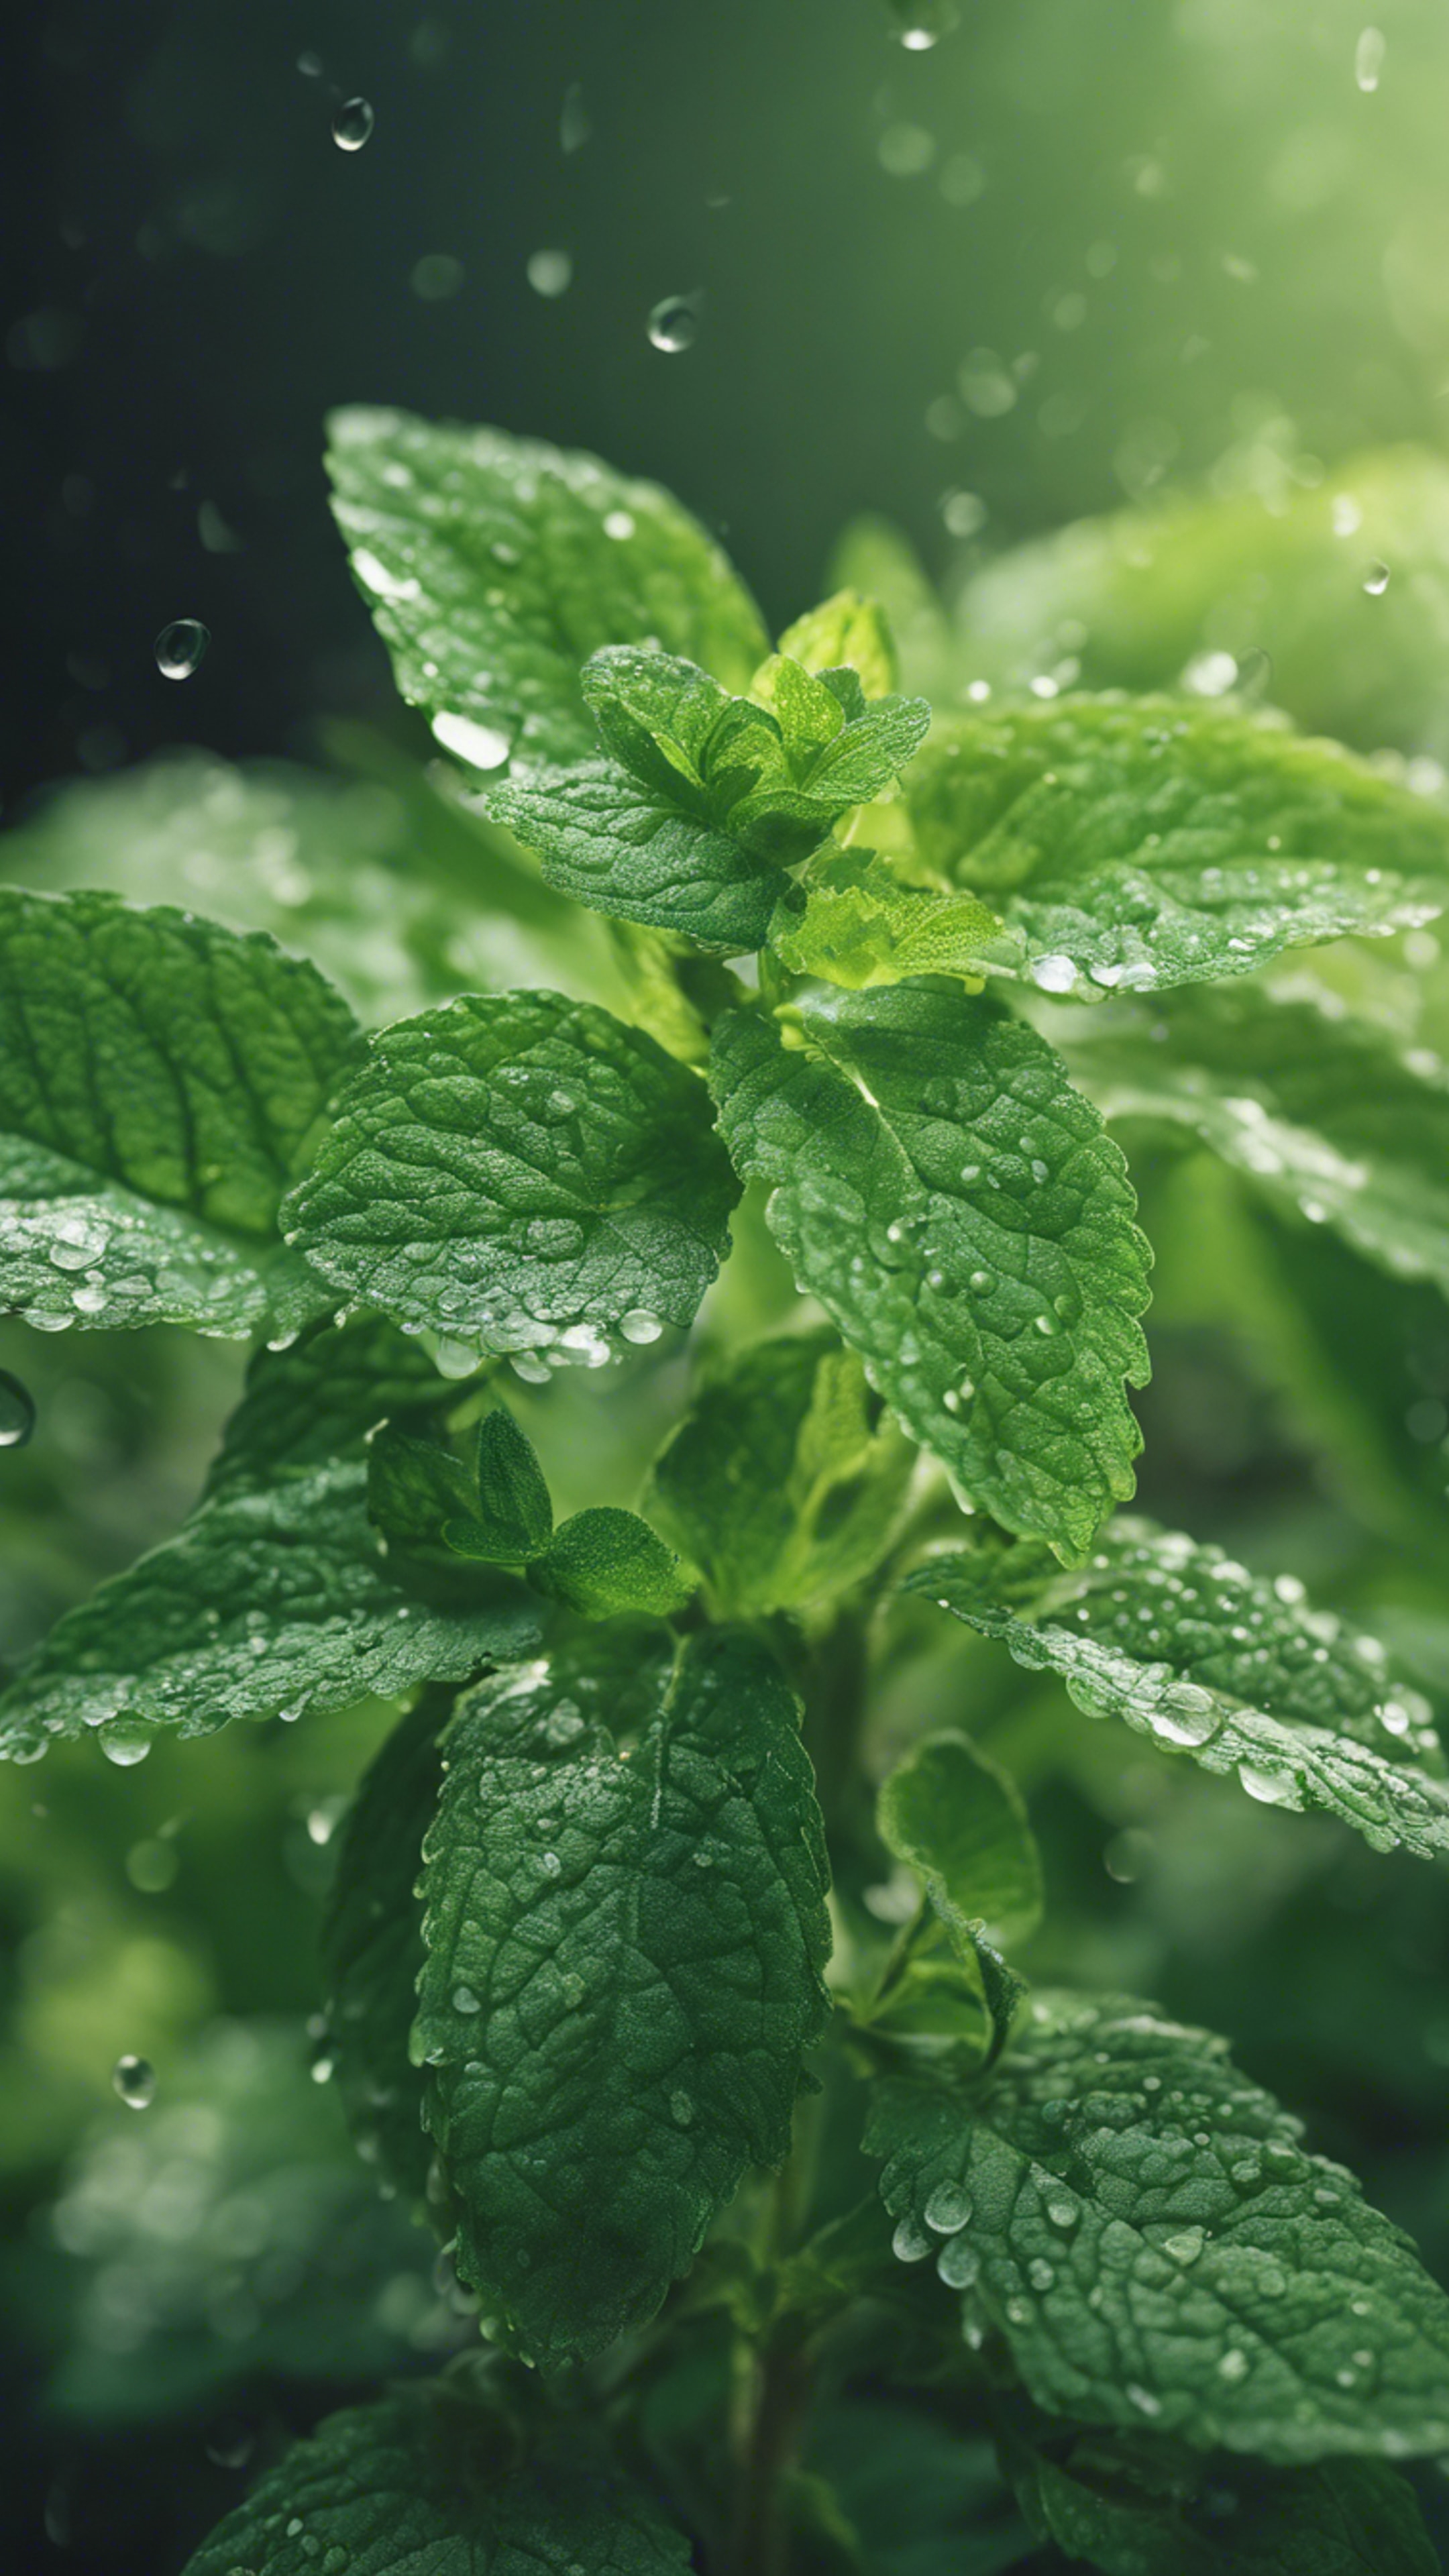 A closeup of a refreshing mint plant with dew drops on its fresh green leaves. Tapeta[bde7a5587e54449fbb31]